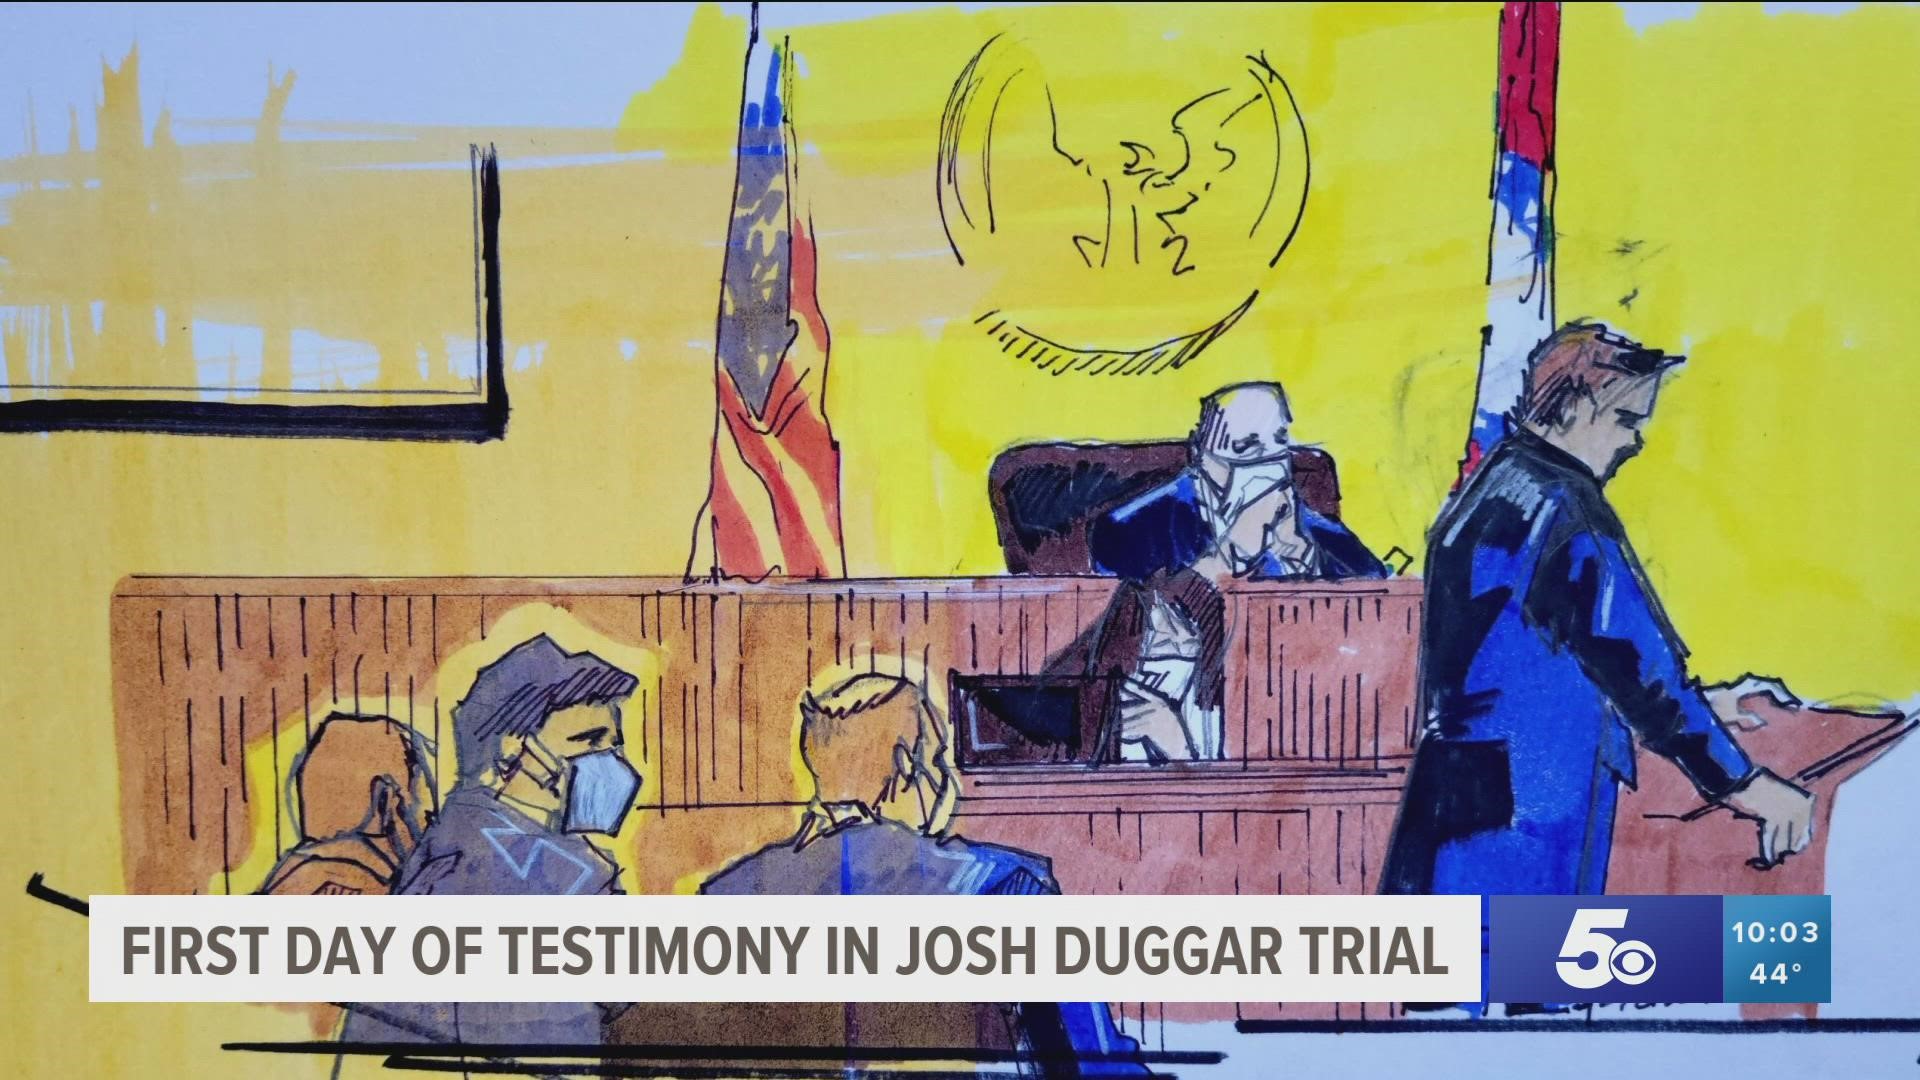 The judge rejected a motion filed by Josh Duggar's attorneys that would have prevented evidence of past molestation allegations from being presented in court.